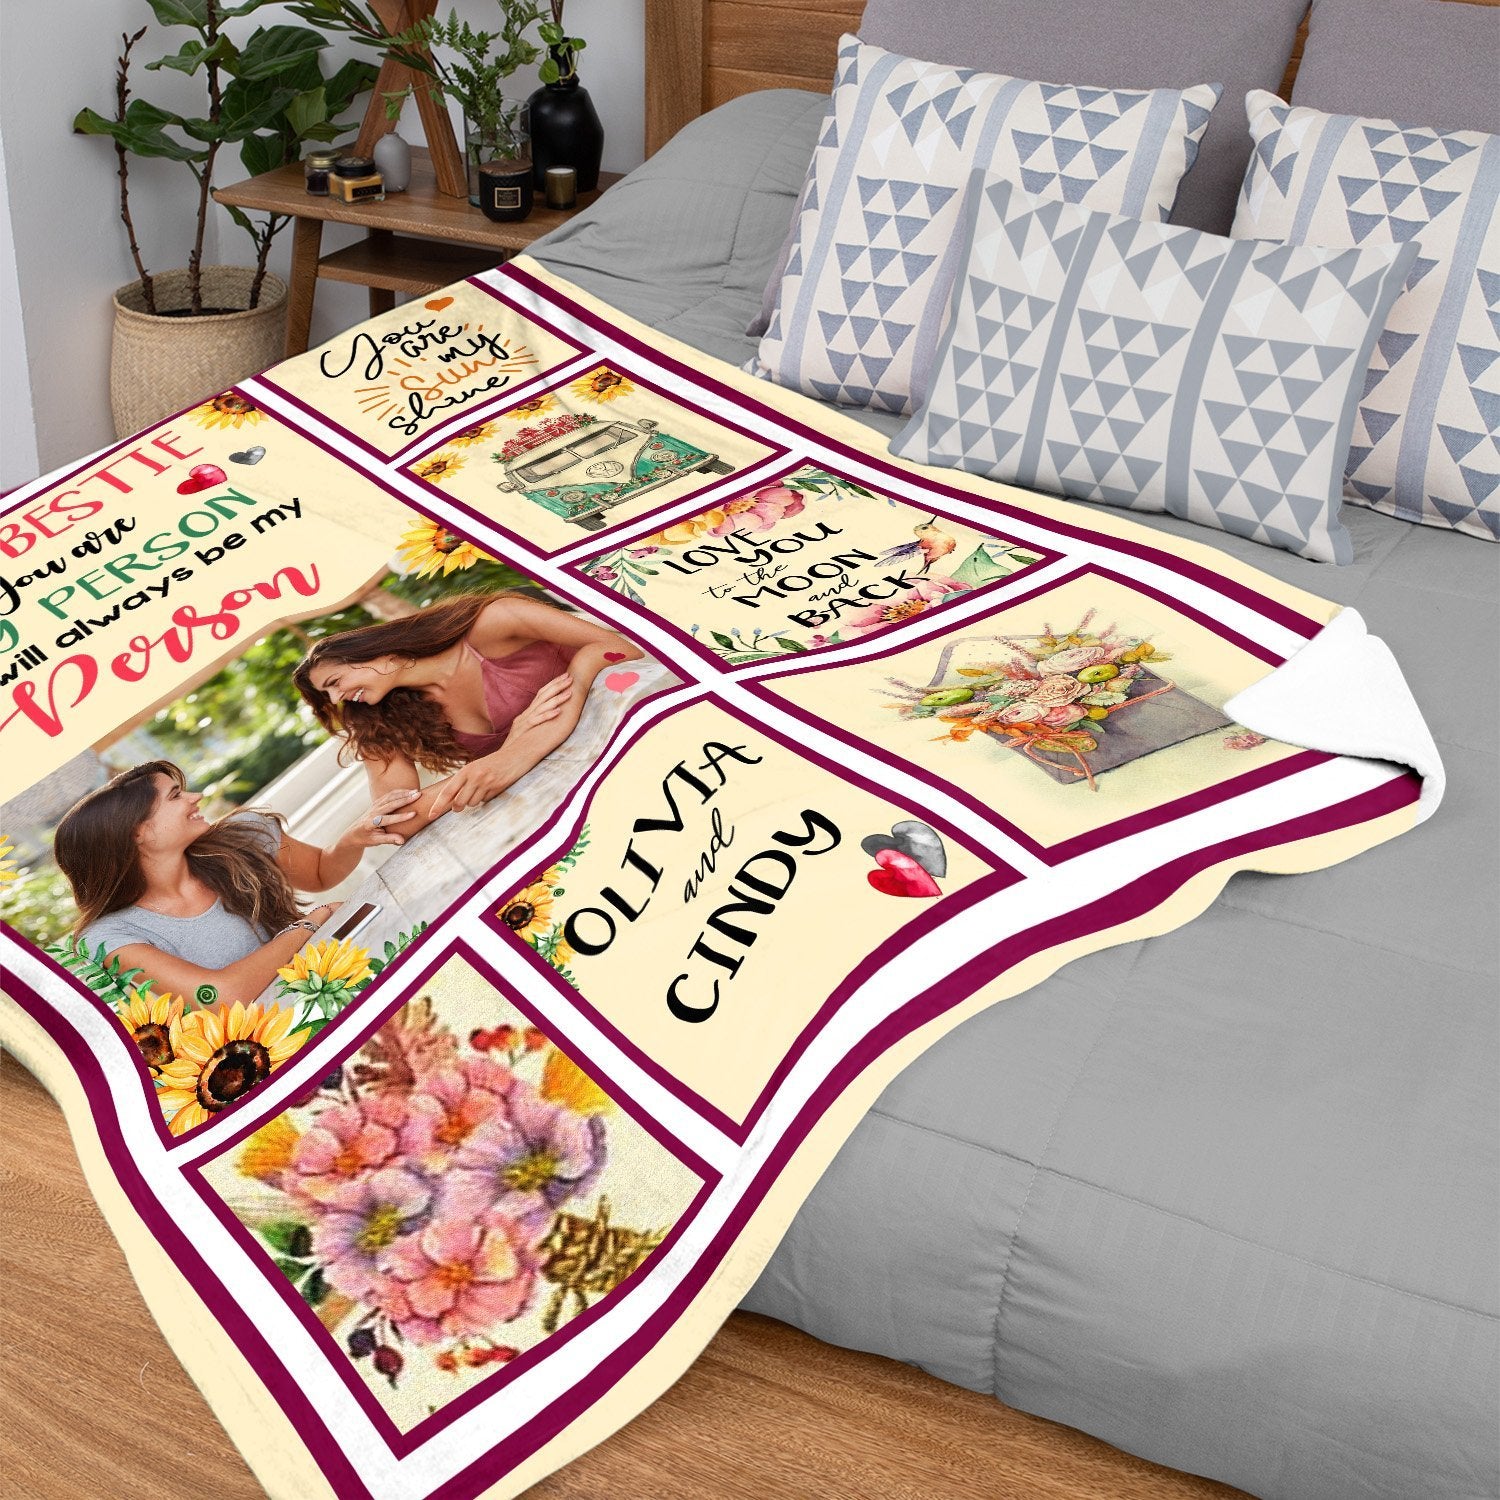 To My Bestie You Are My Person You Will Always Be My Person, Custom Photo, Personalized Name Blanket